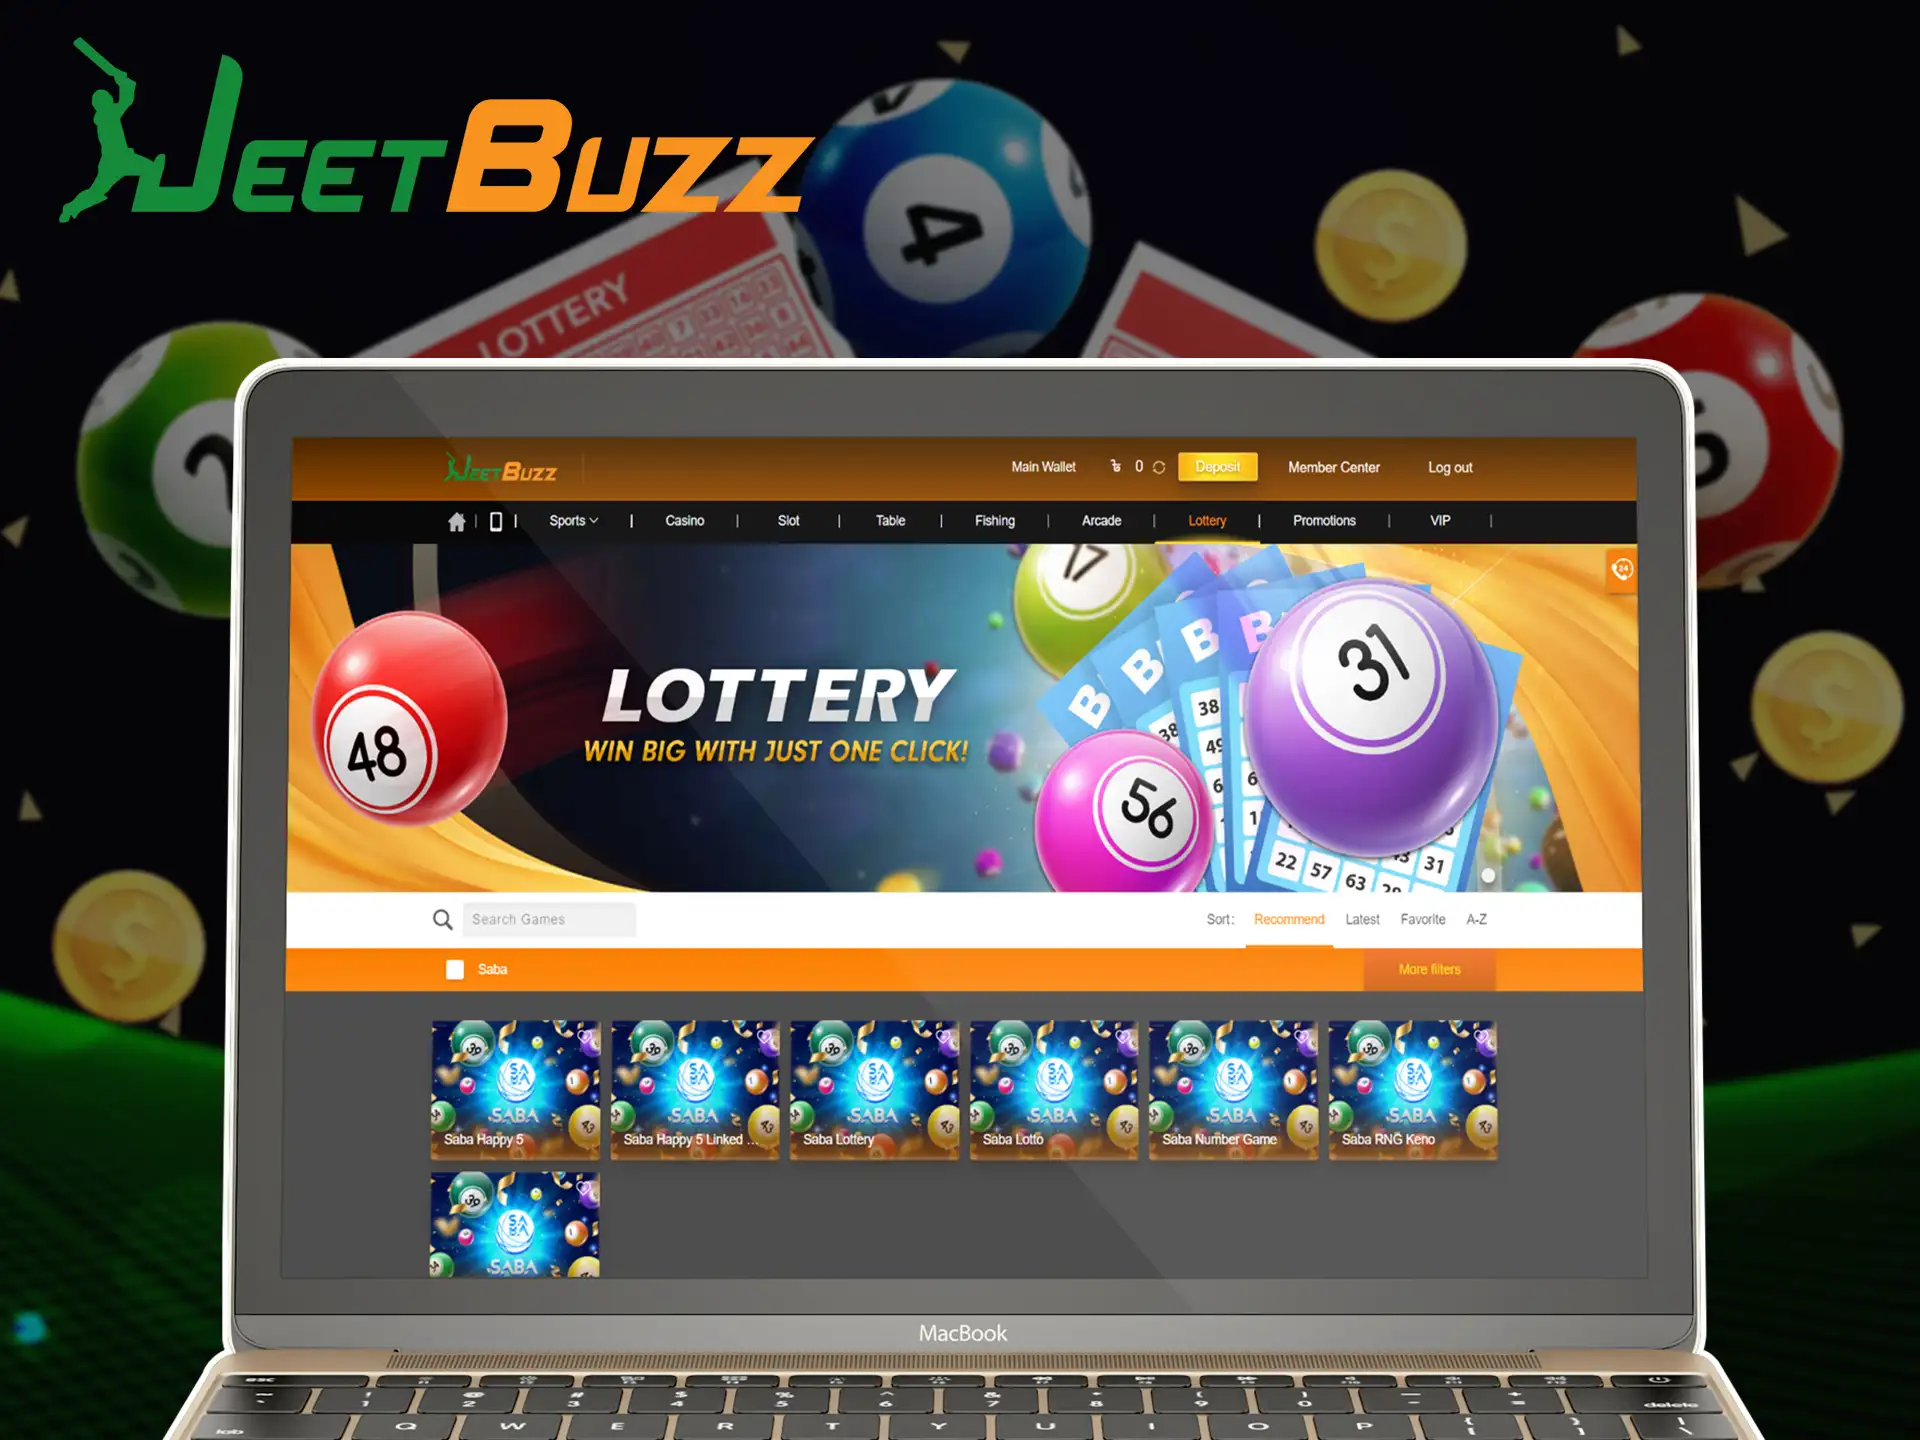 Try your luck to win in the lotteries games at JeetBuzz.